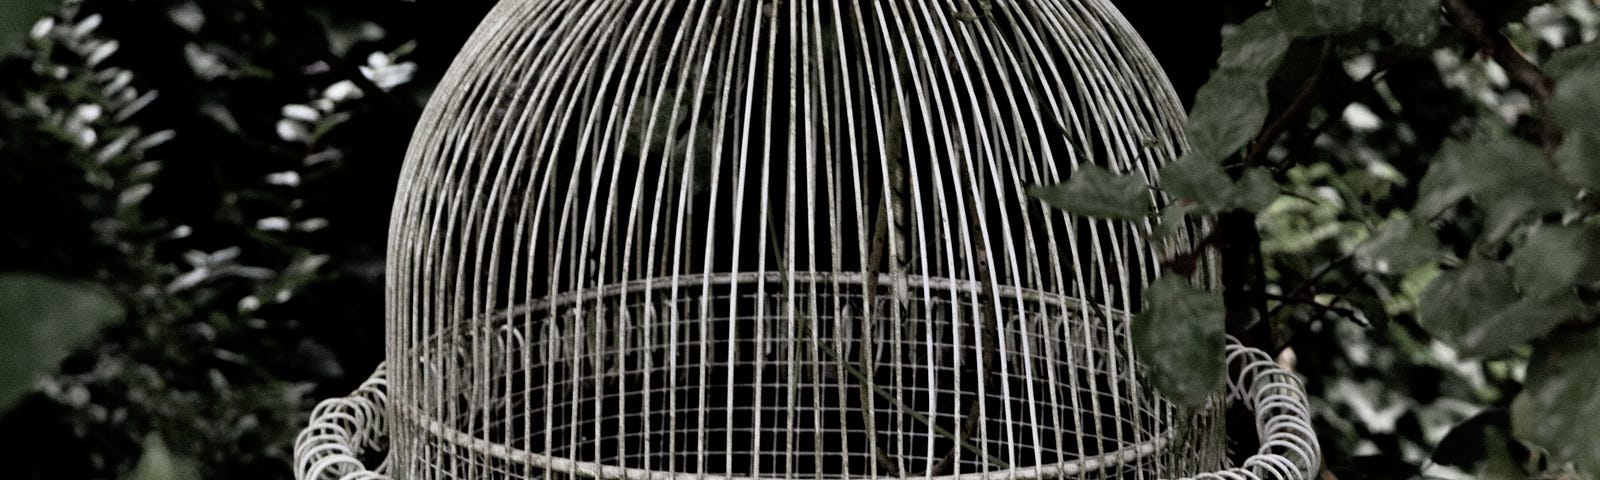 A wire birdcage hanging among tree branches, its door open, with no bird in sight.